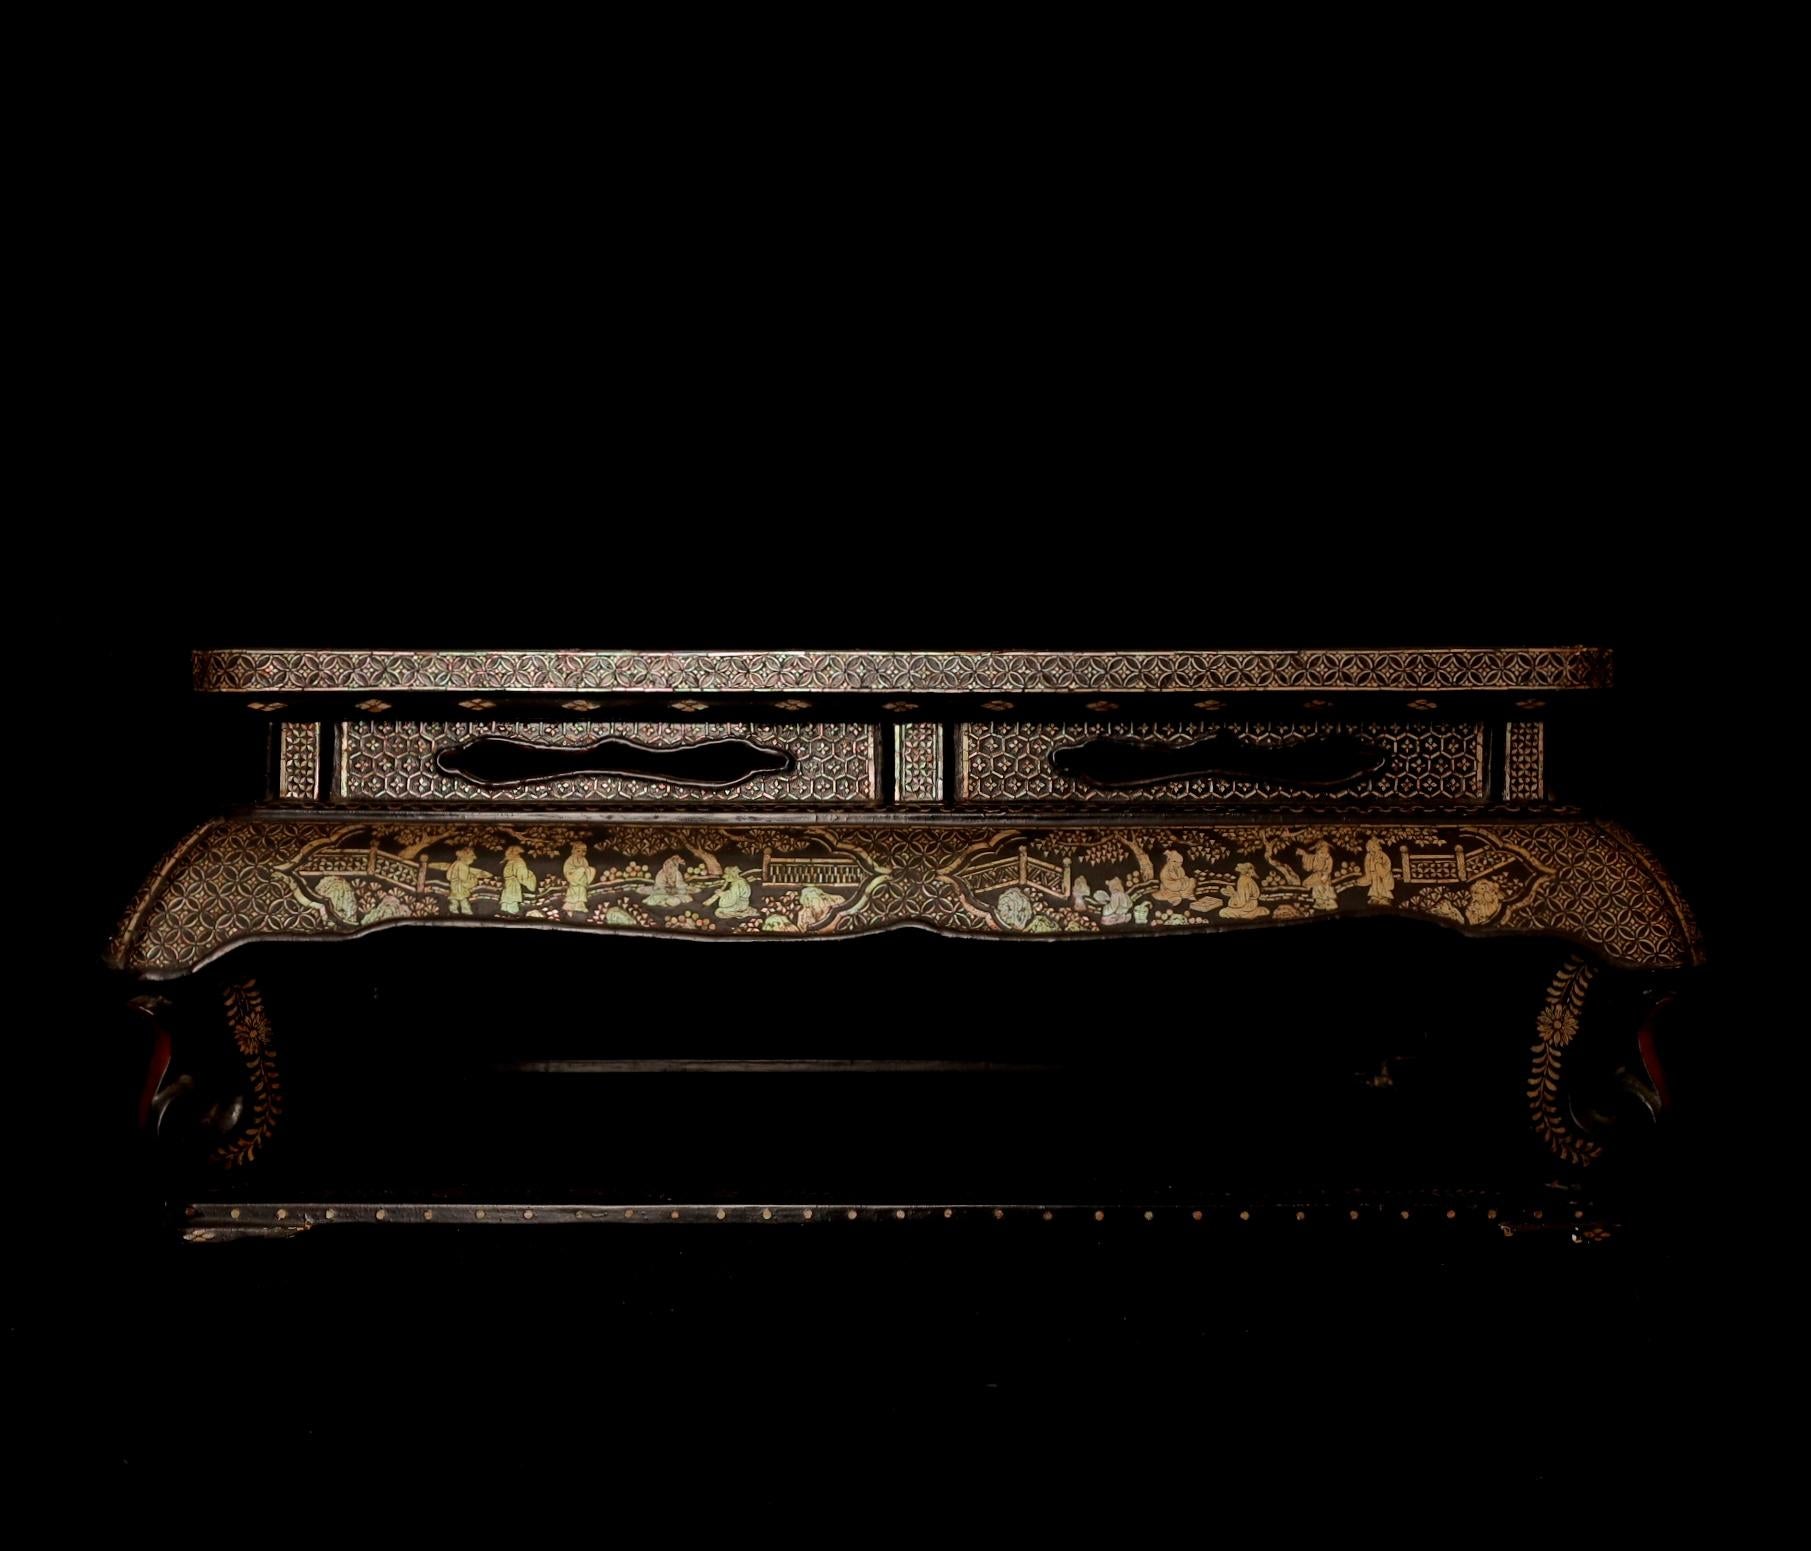 Ming Dynasty Period Scholar's Garden: Mother-of-Pearl Inlaid Lacquer Kang Table For Sale 4